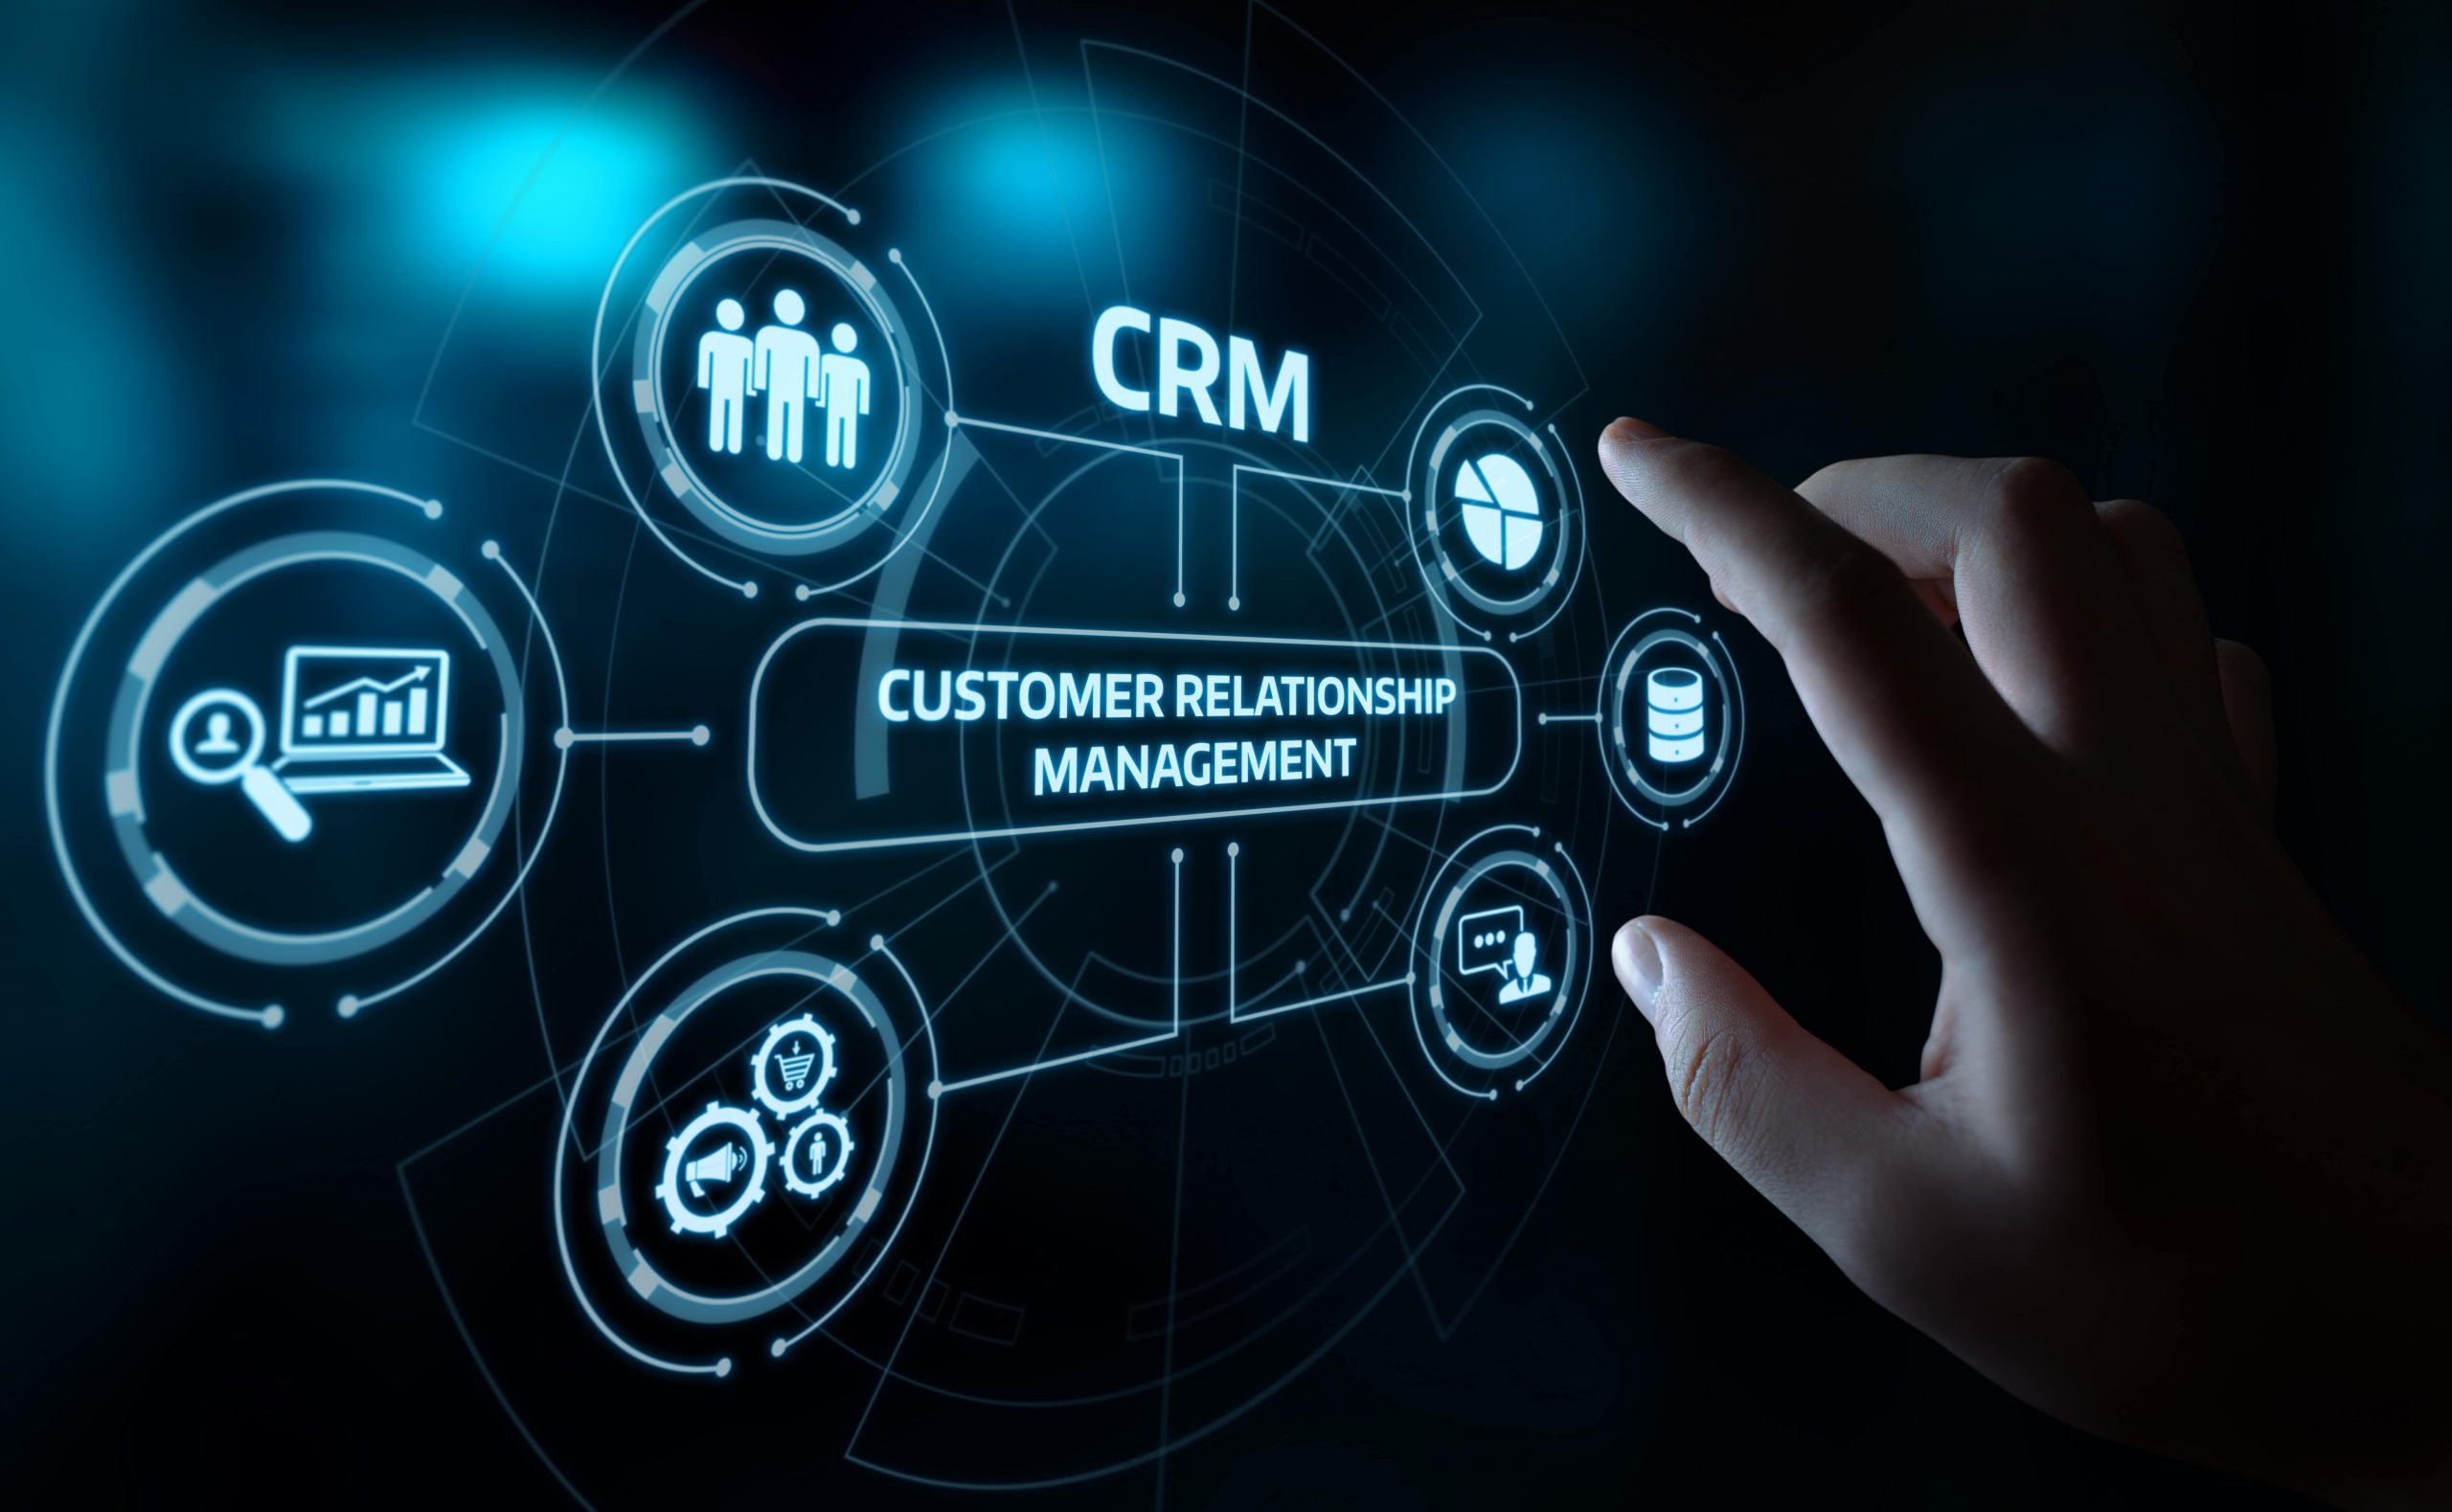 Techy image of CRM and its integrations